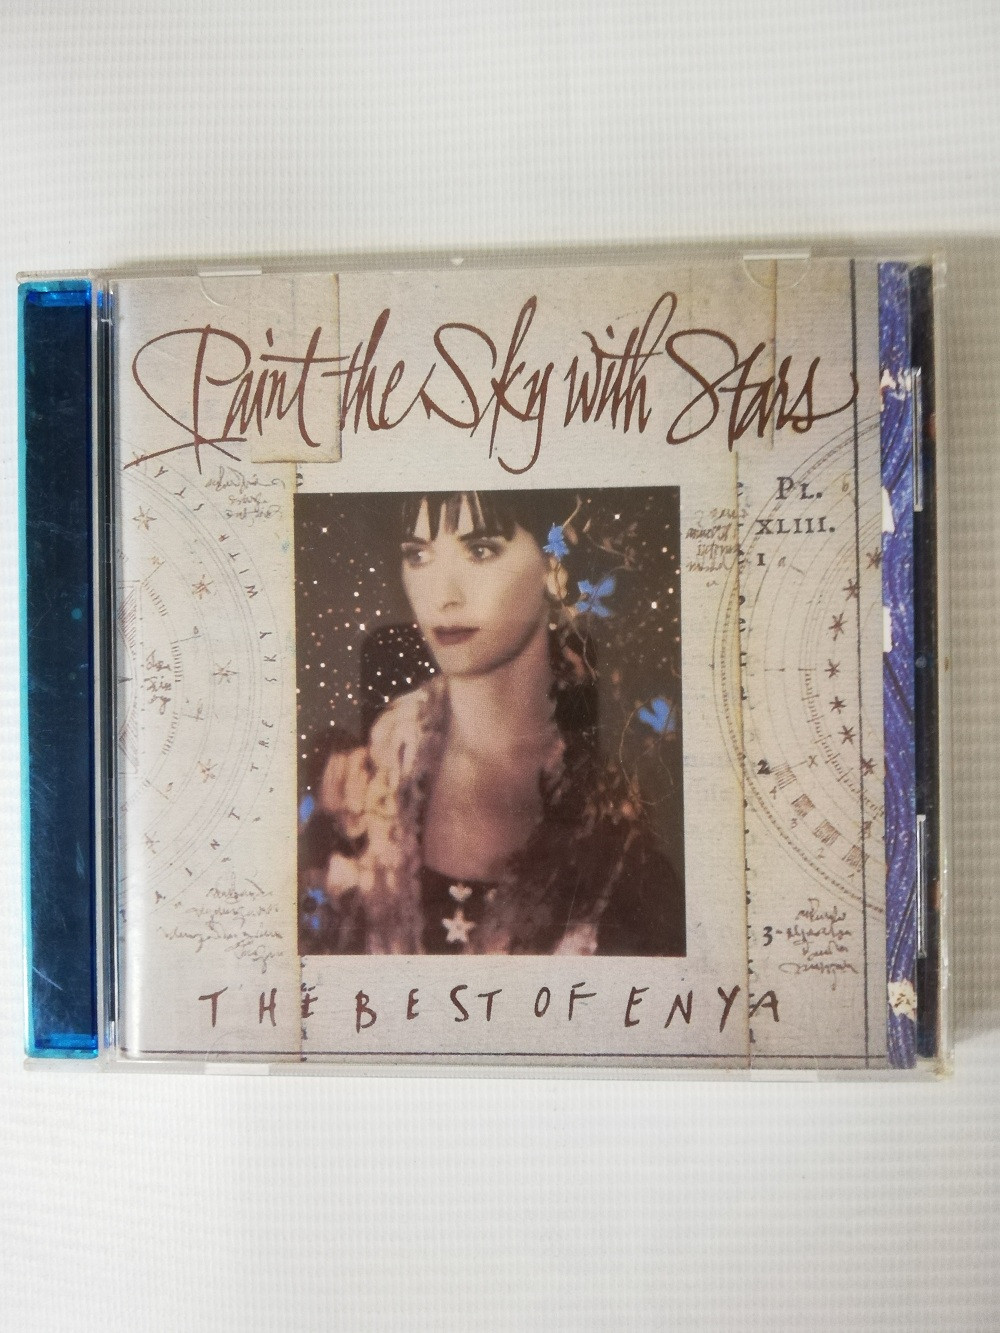 Imagen CD ENYA - PAINT THE SKY WITH STARS